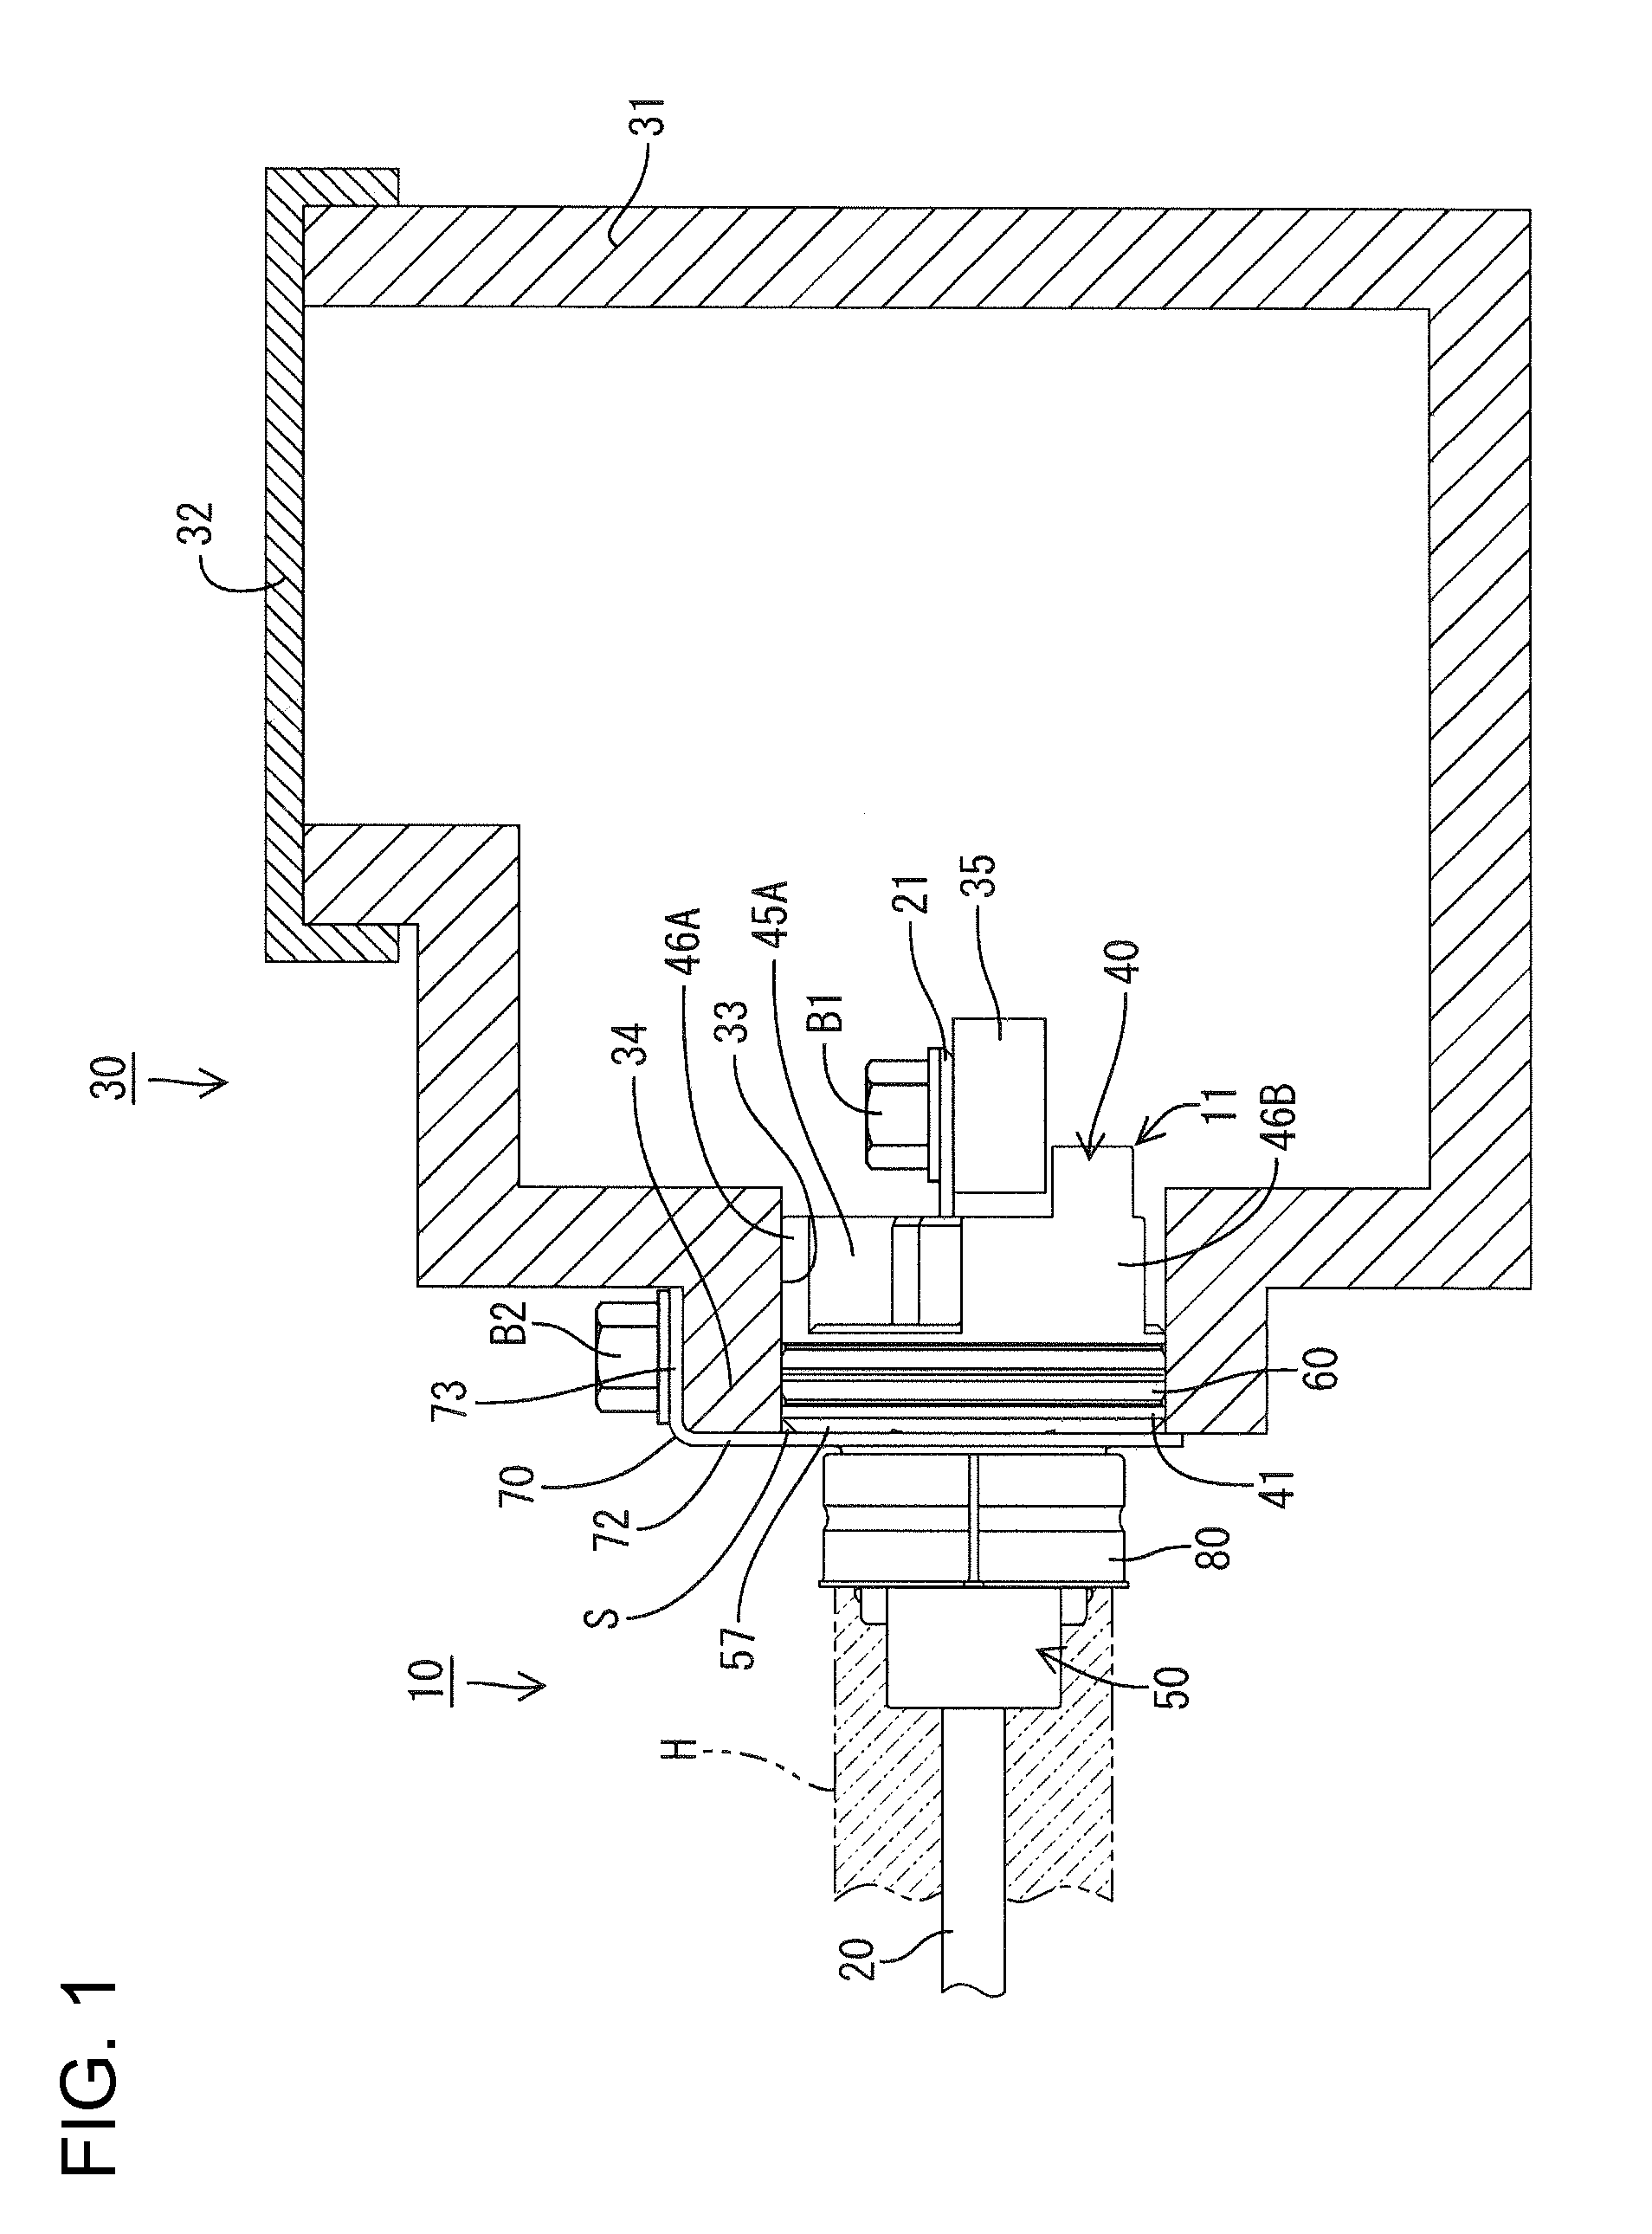 Connector with guide ribs and reinforcing ribs